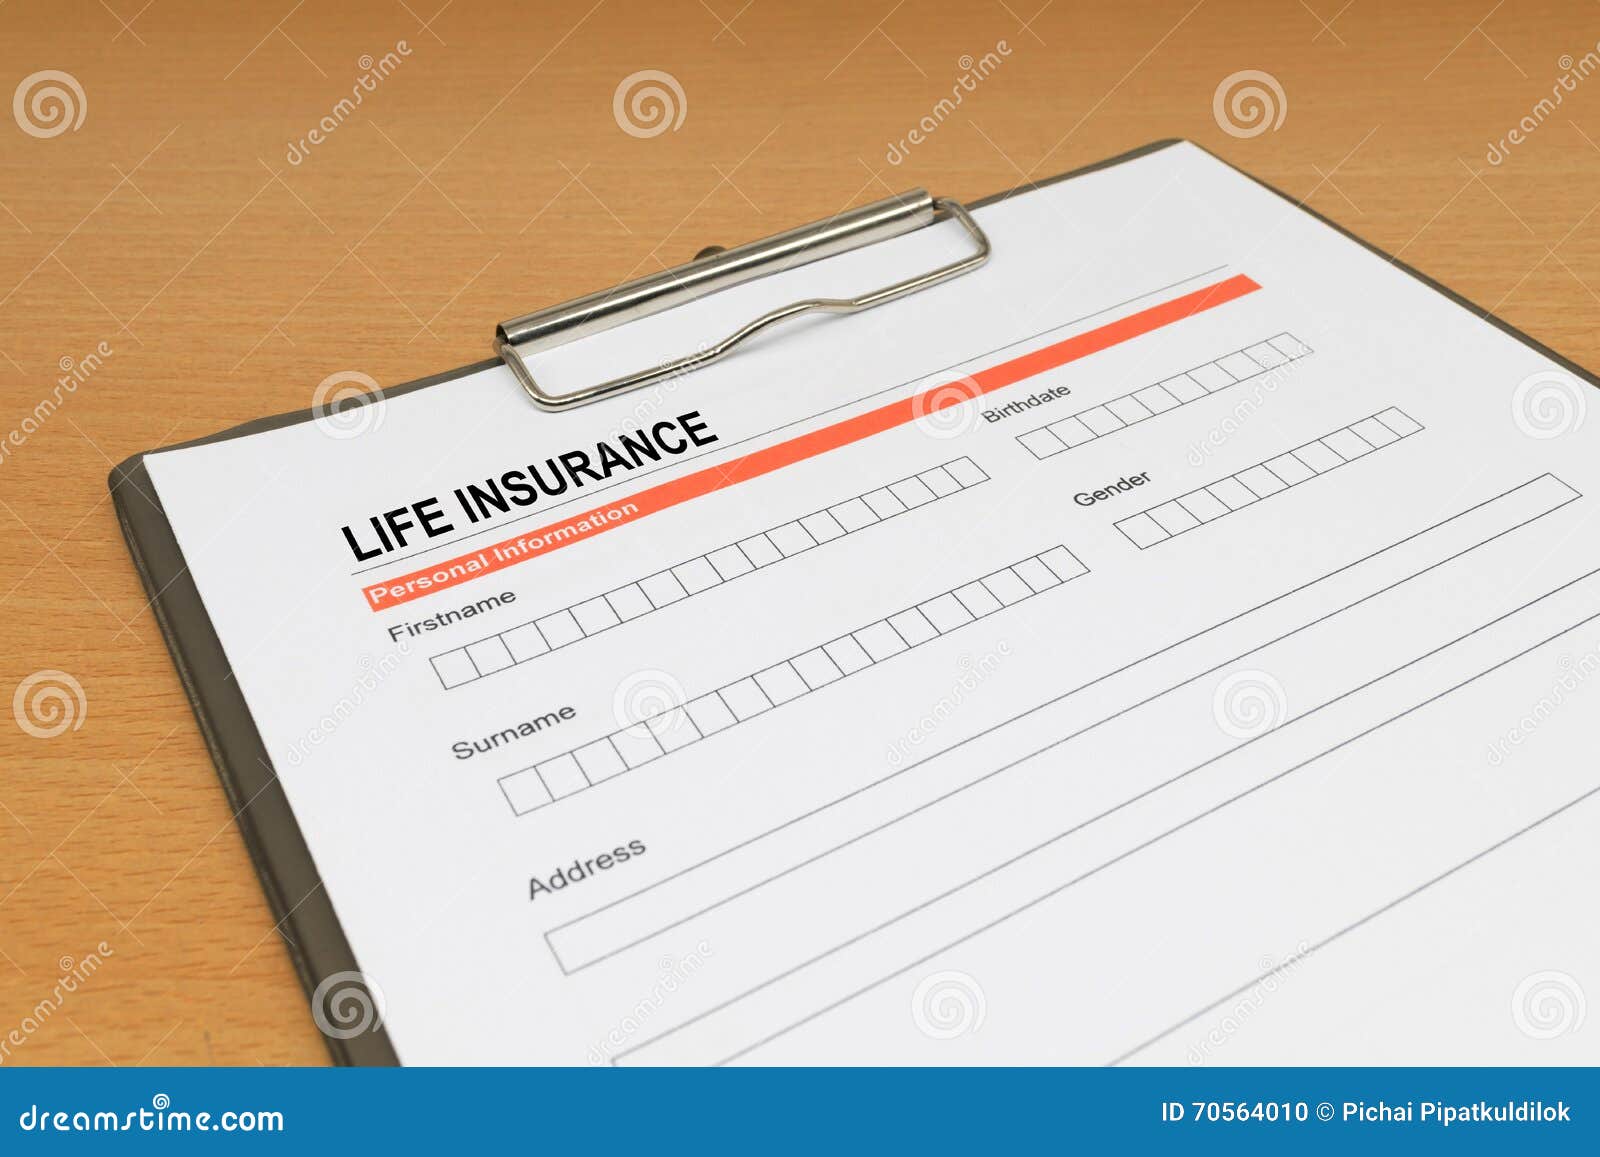 Life Insurance Application Form Stock Photo Image of